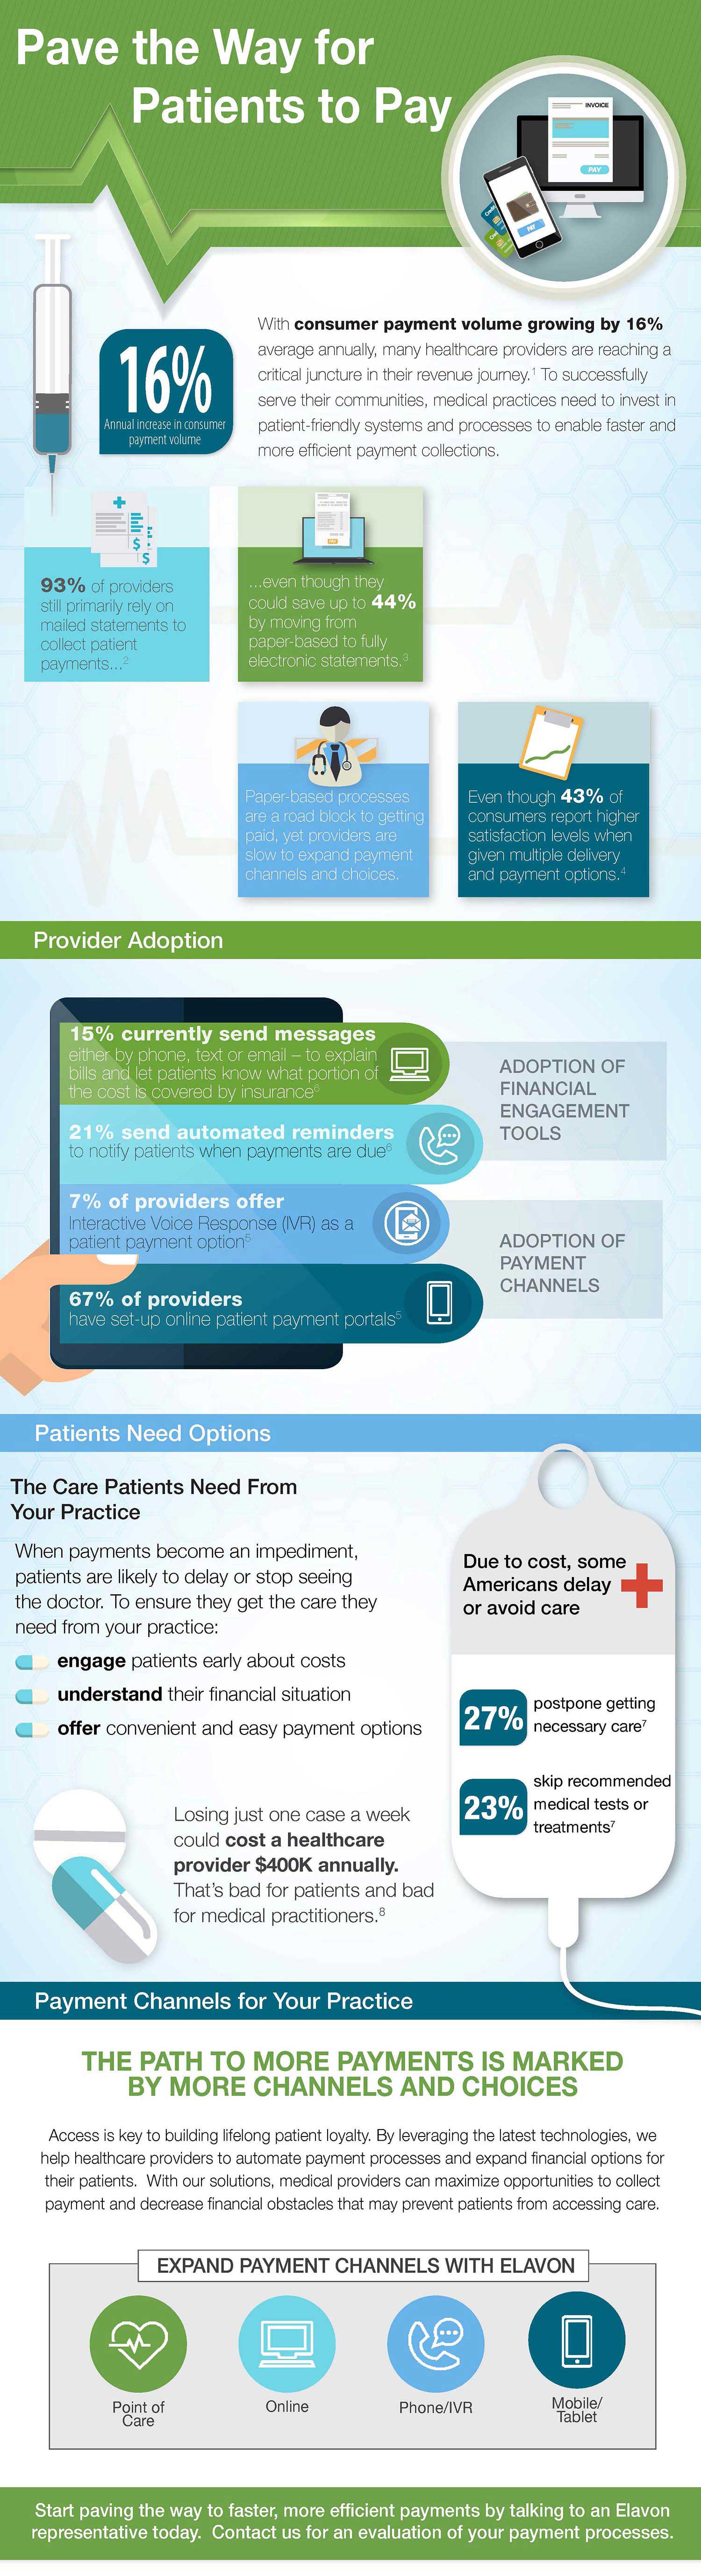 Pave the Way for Patients to Pay Infographic